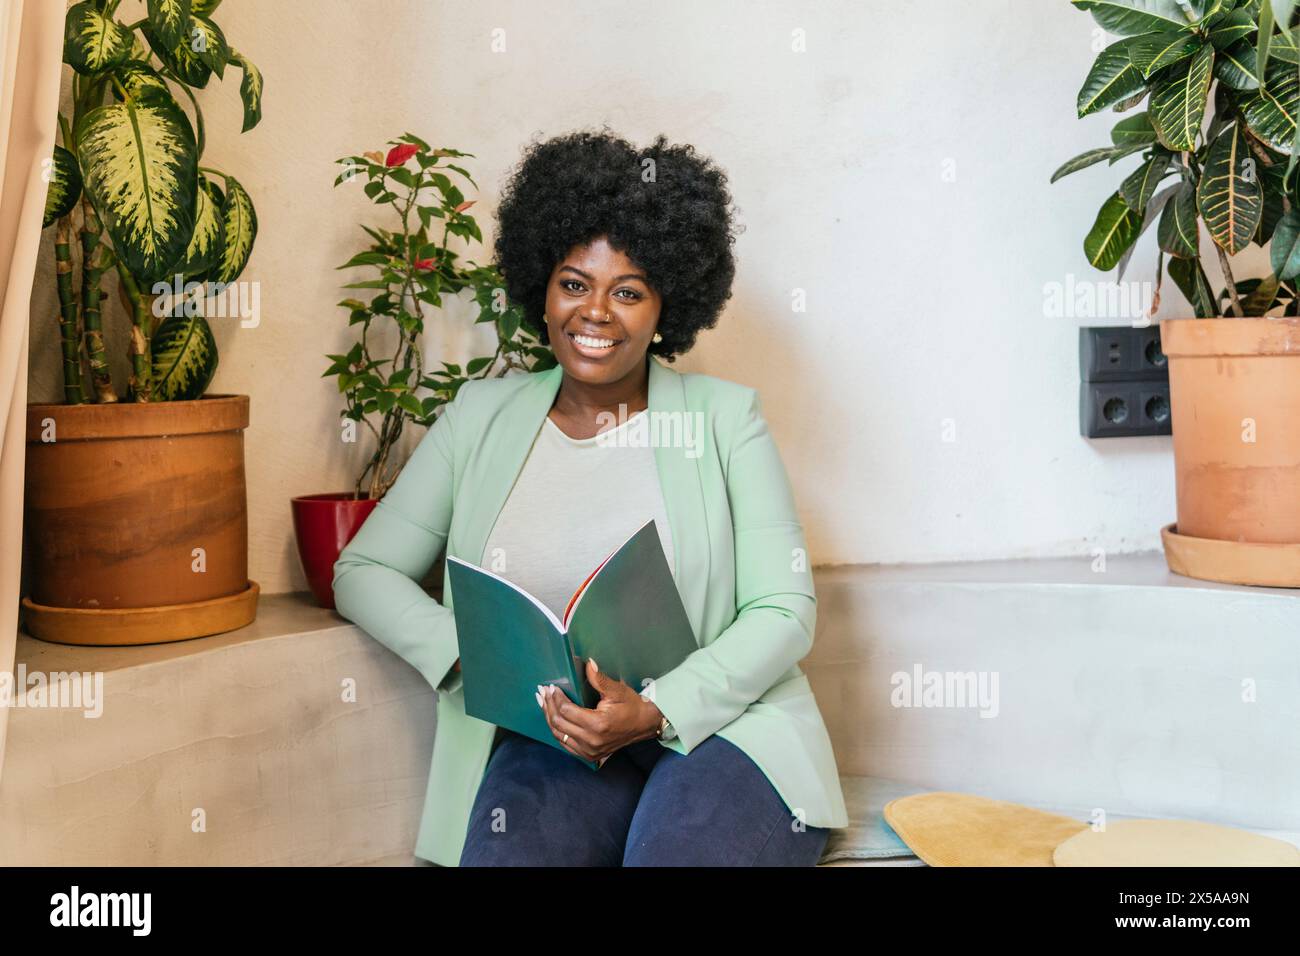 A cheerful woman in a stylish green blazer holds a notebook, seated beside lush indoor plants, radiating confidence and positivity in a coworking spac Stock Photo